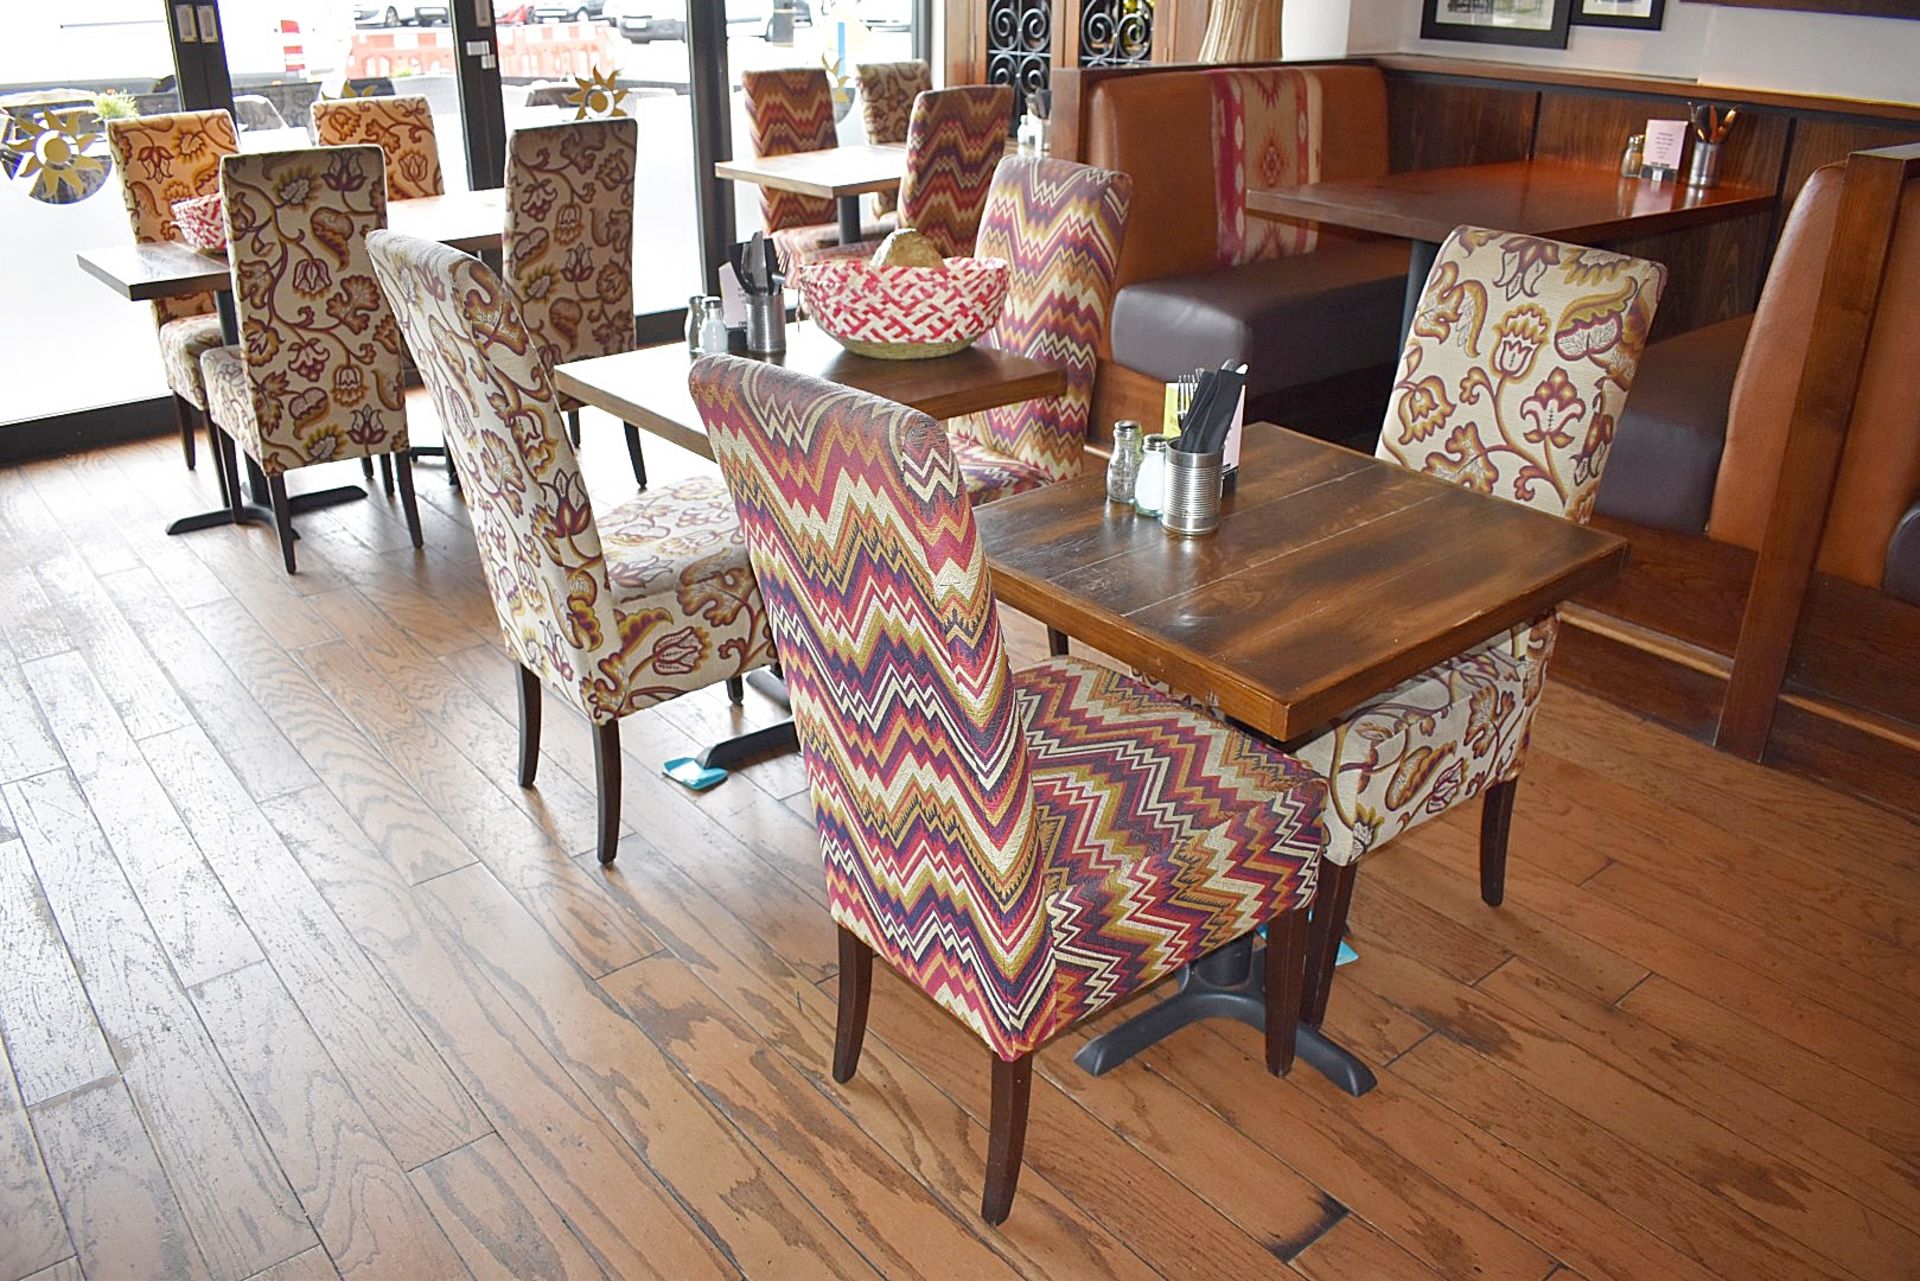 6 x Upholstered Restaurant Dining Chairs In A Floral Mexican-style Fabric - H95 x 40 x 40cm - Image 2 of 4